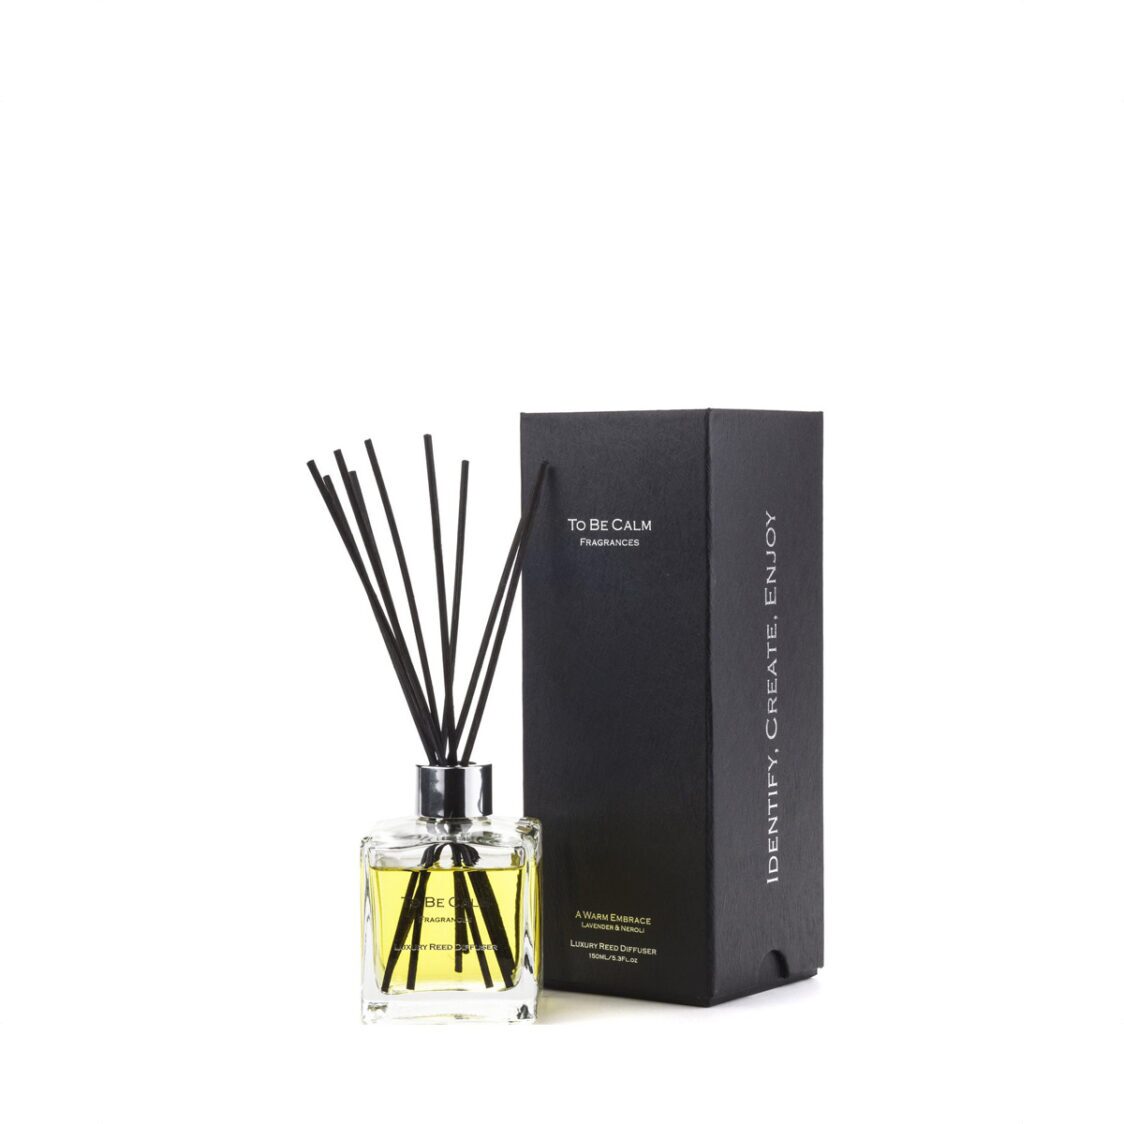 To Be Calm A Warm Embrace - Lavender  Neroli - Reed Diffuser 150ml